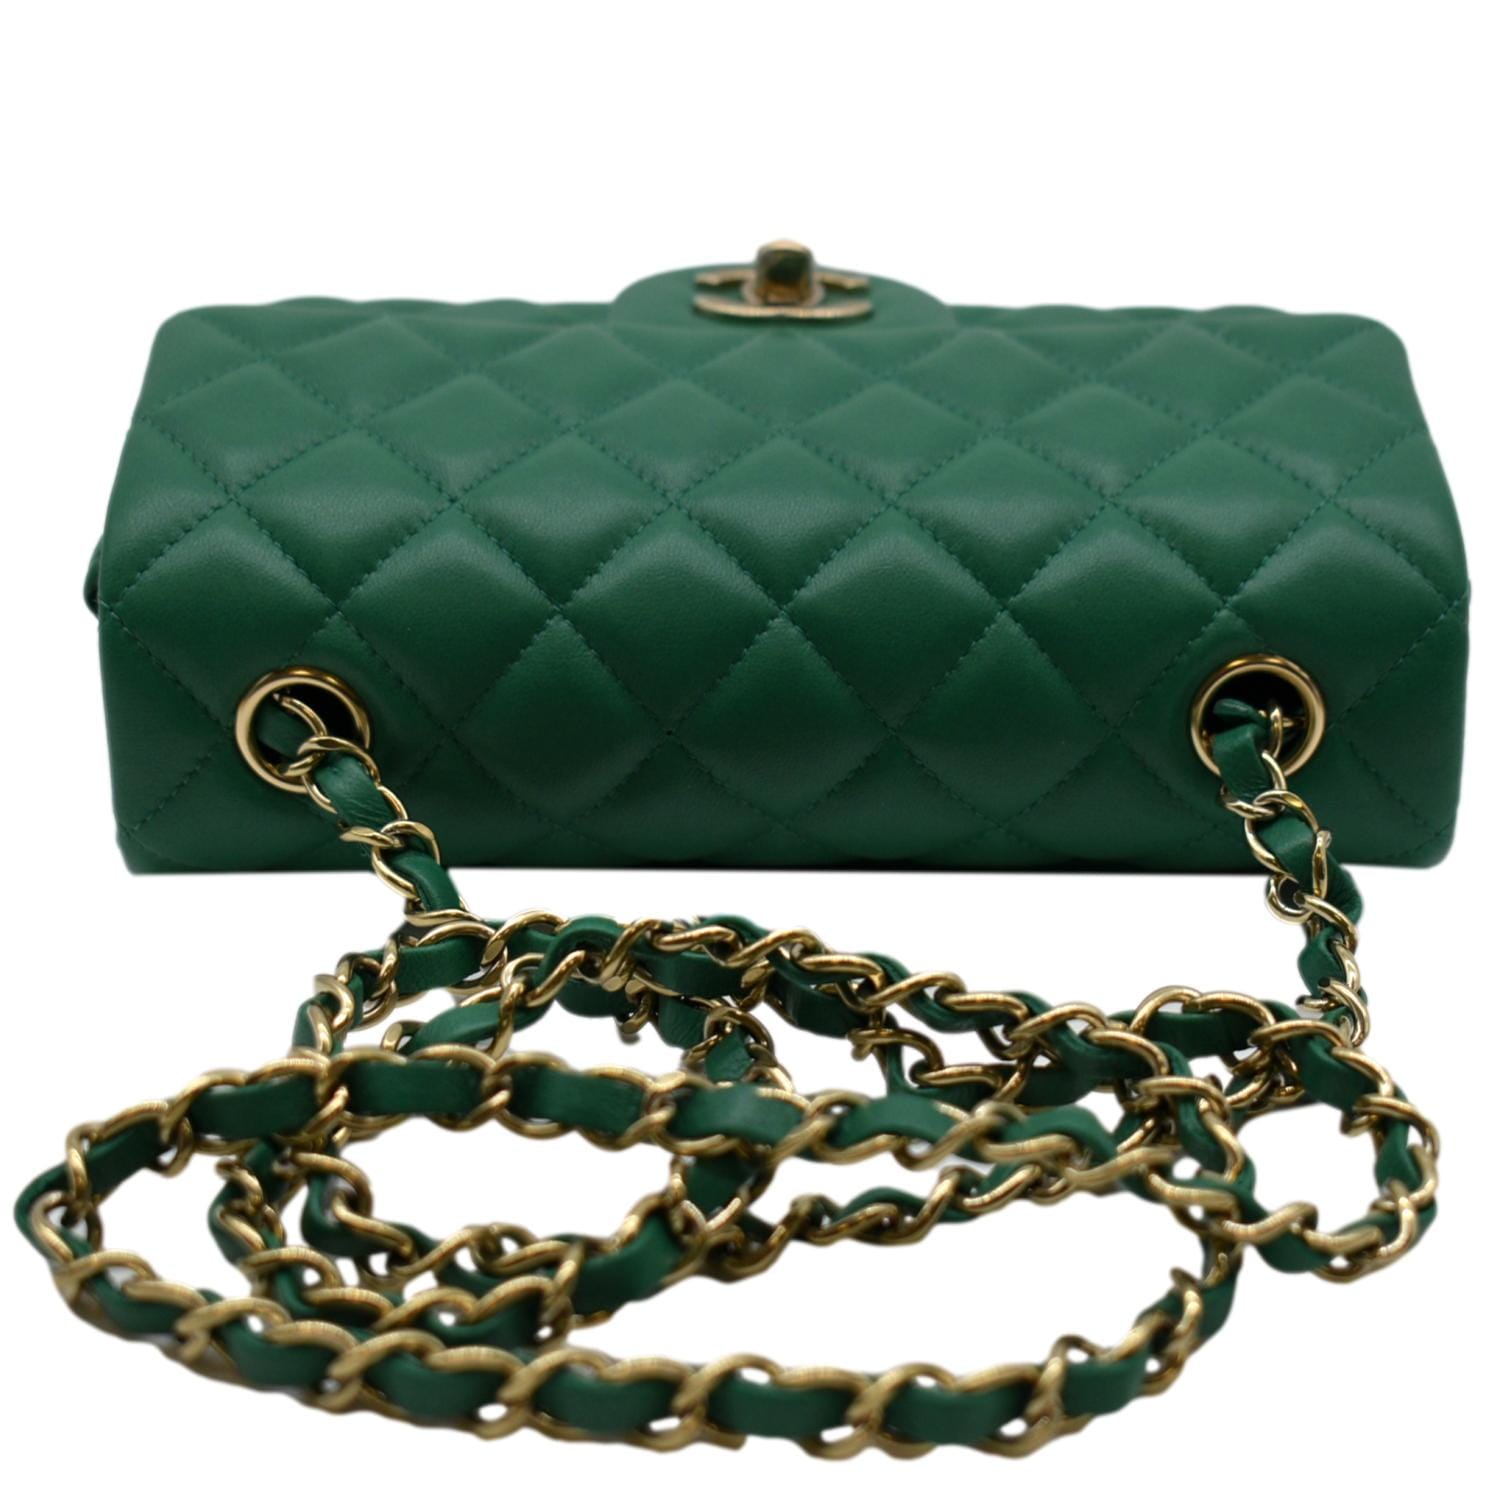 Chanel Mini Rectangular Flap Quilted Leather Crossbody Bag Green